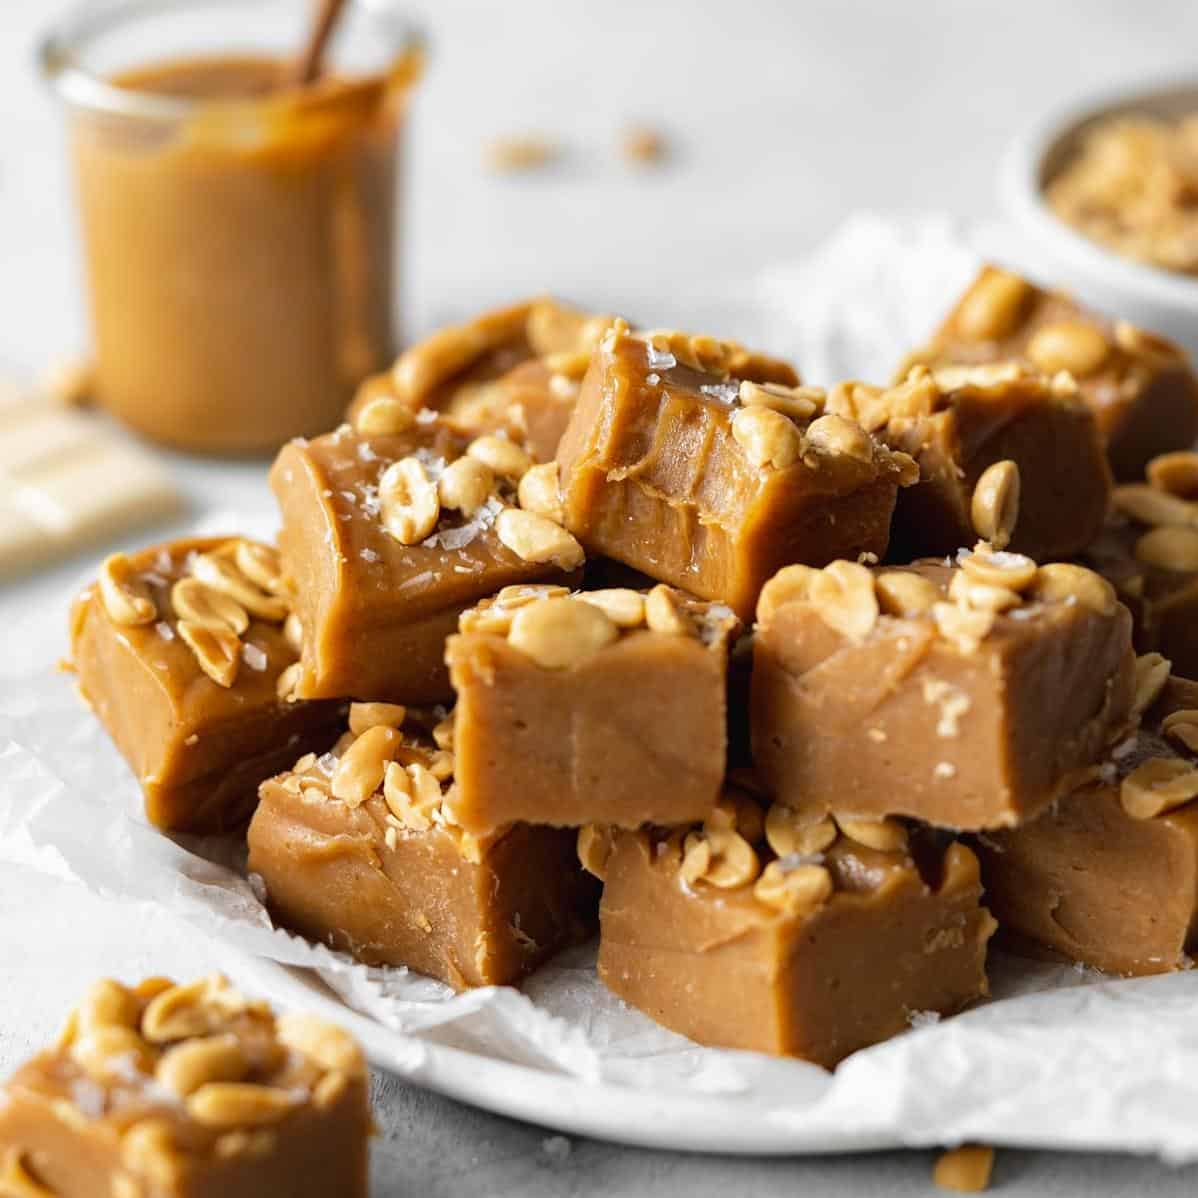  Peanut butter lovers rejoice! This fudge is the ultimate treat for you.